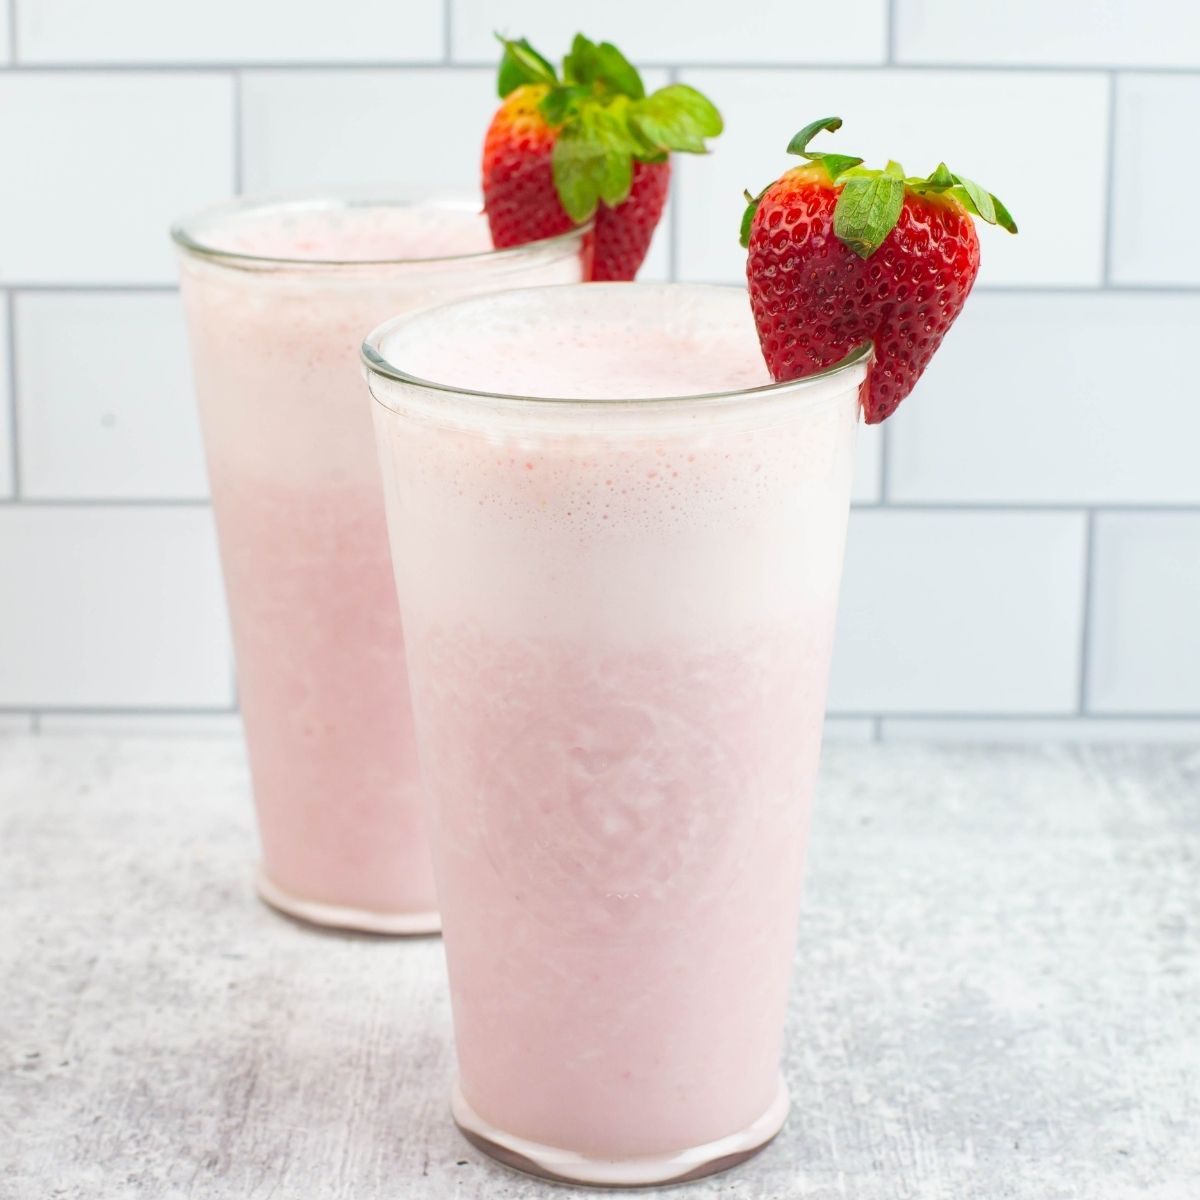 Two tall glasses filled with a homemade Tropical Smoothie made with coconut milk and fruit.